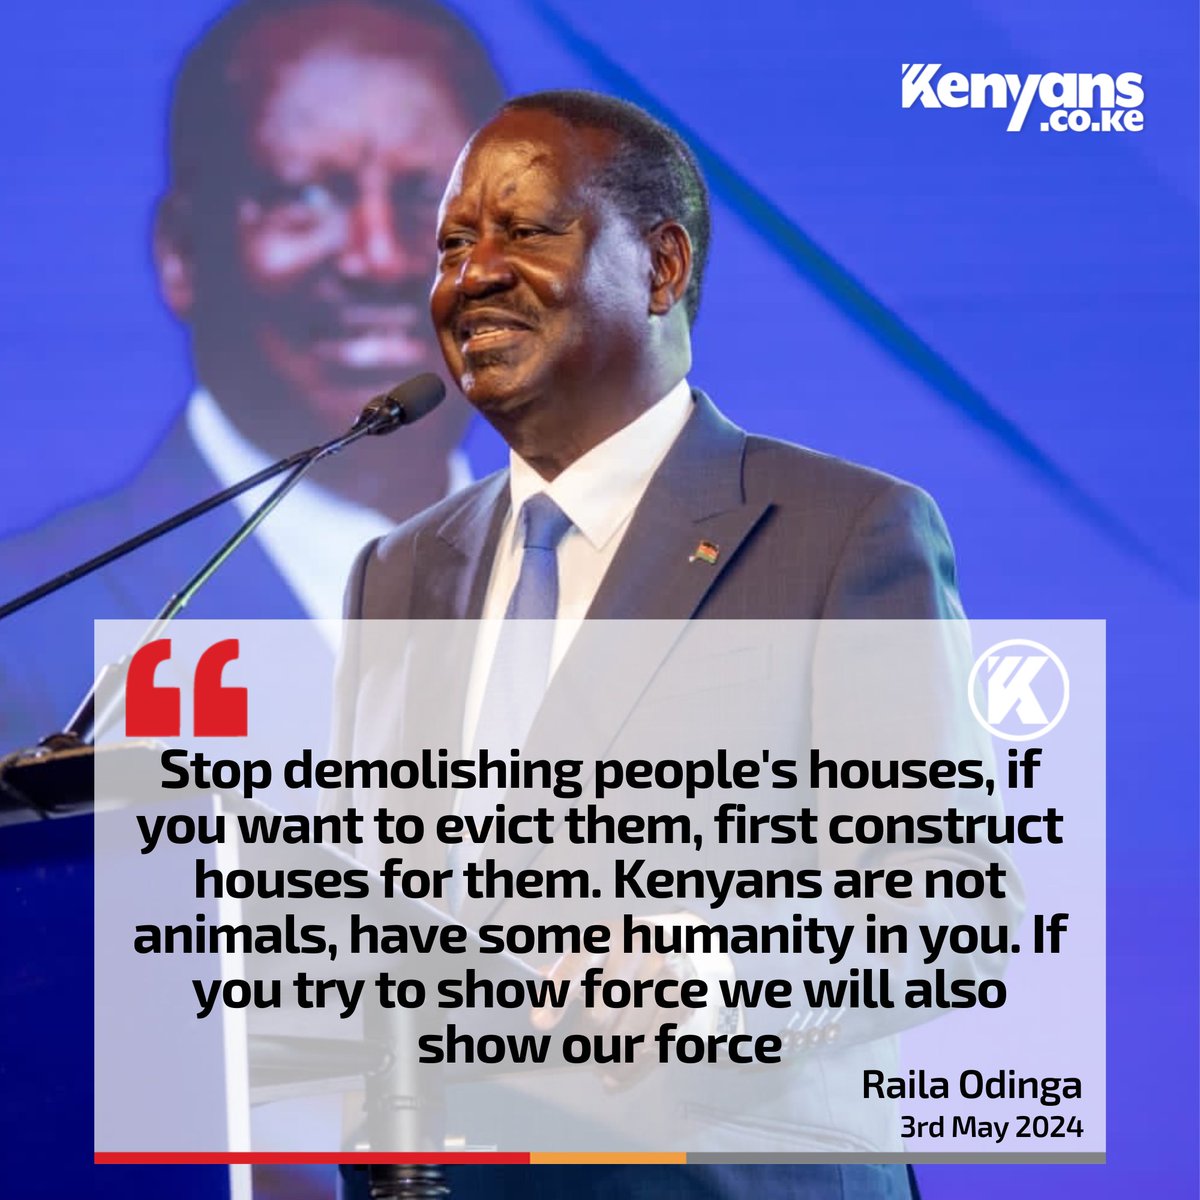 Stop demolishing people's houses, if you want to evict them, first construct houses for them - Raila Odinga. Tugeges hapo vipi?